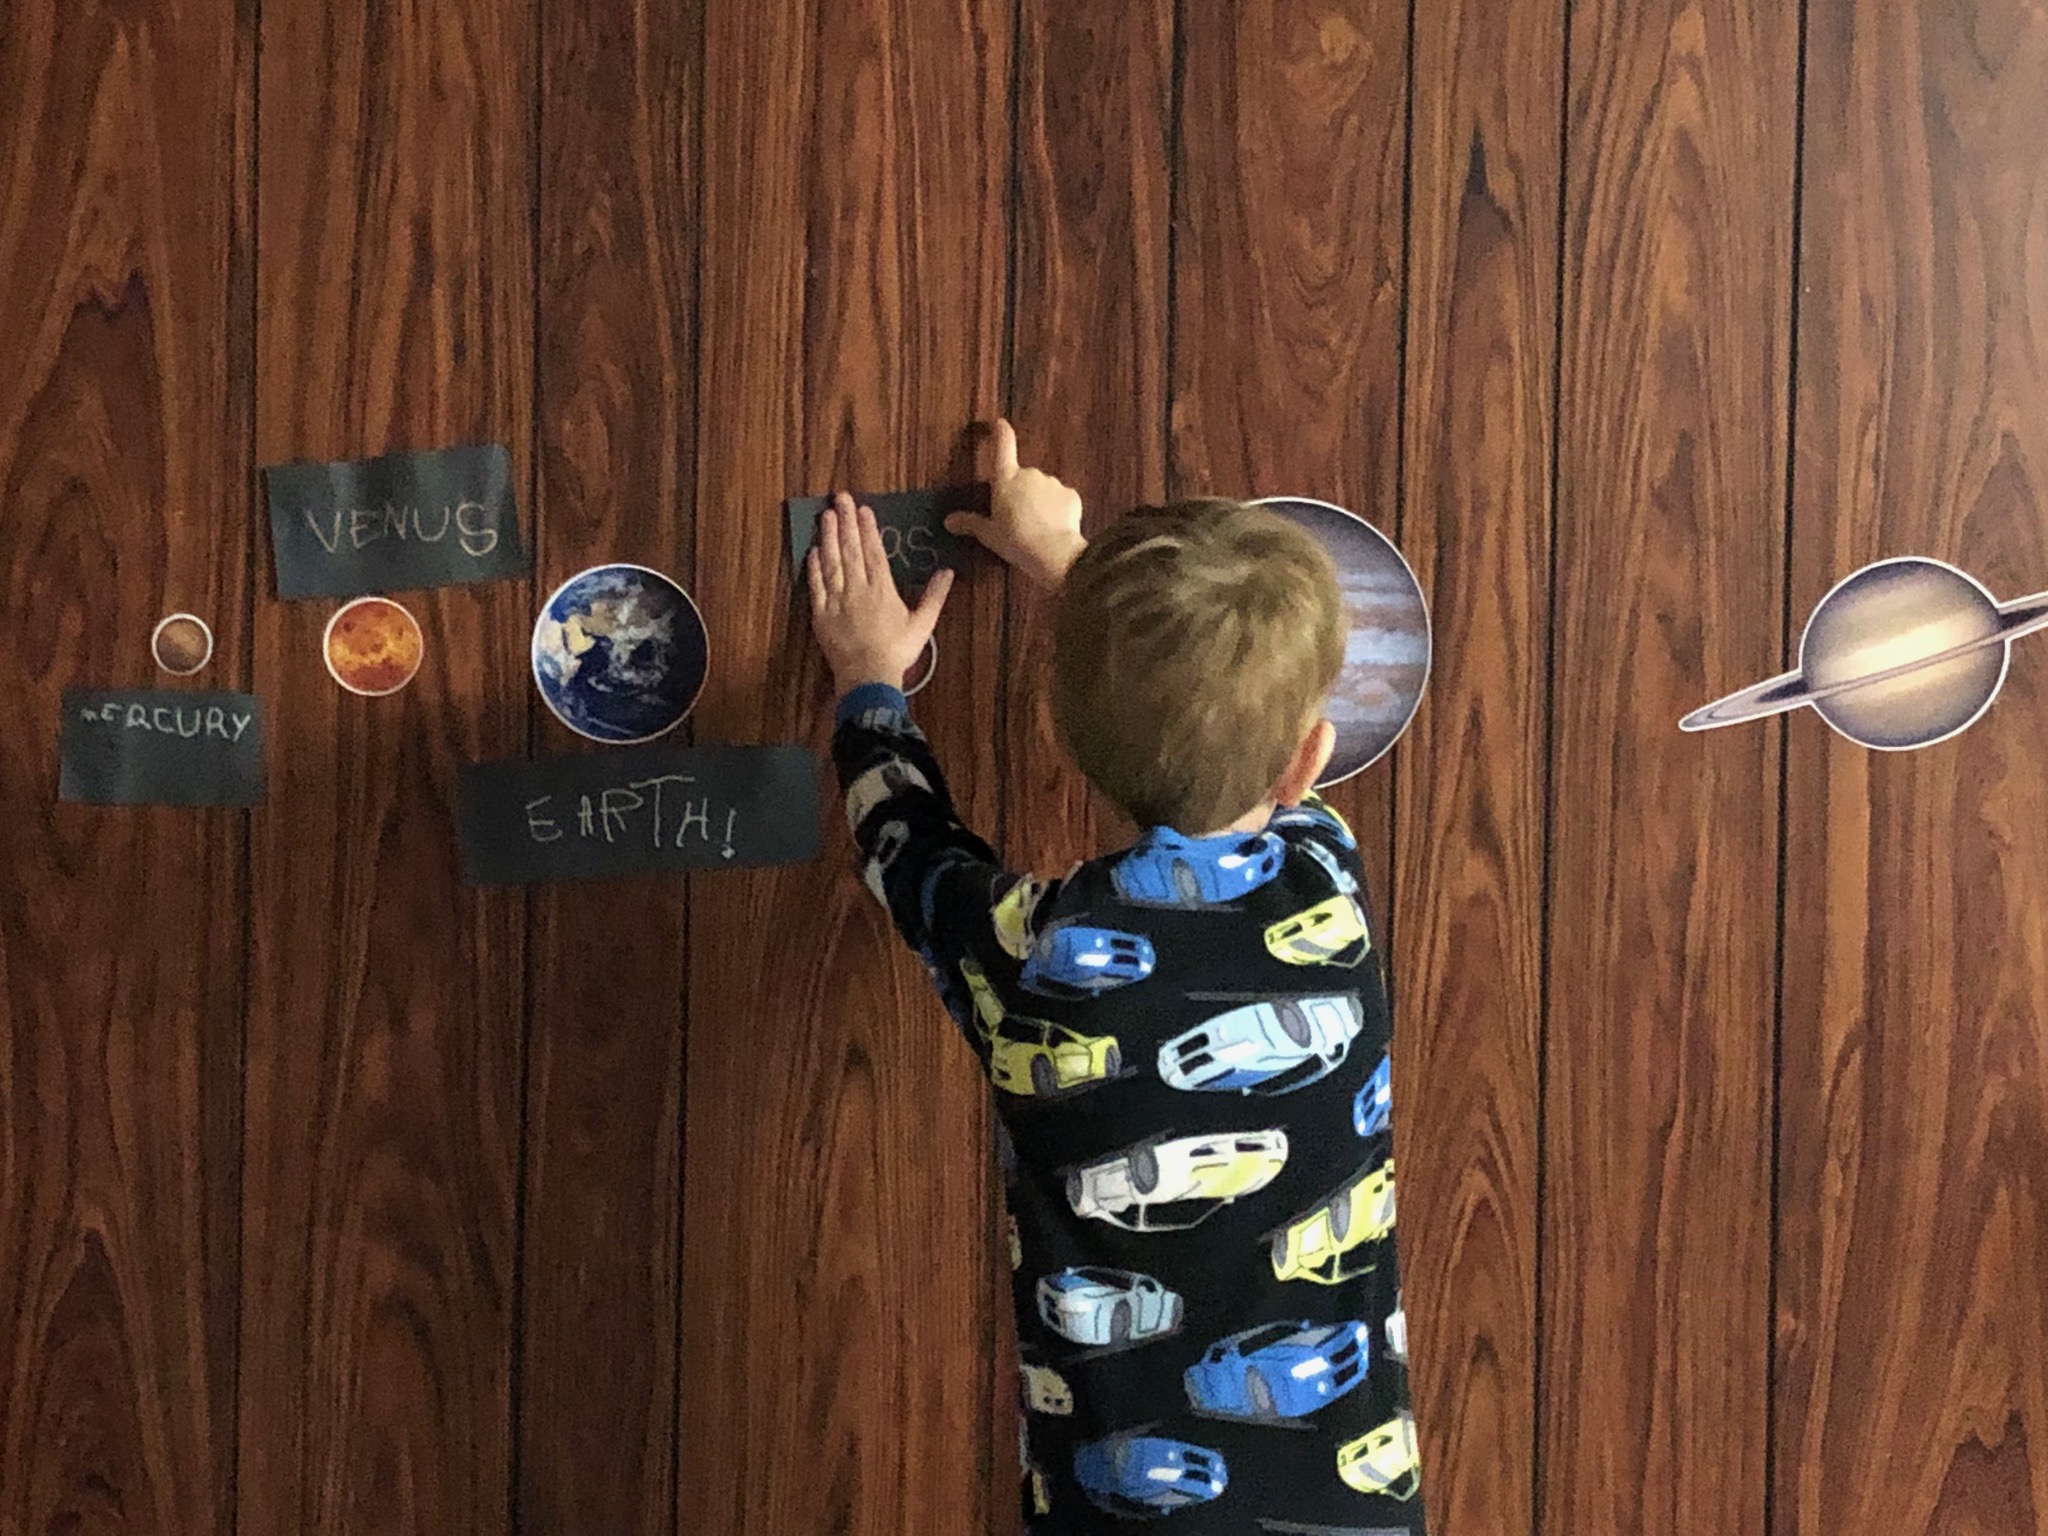 A young boy is sticking a black label for Mars up on a wall. Planet wall stickers and labels can be seen for Mercury, Venus and Earth